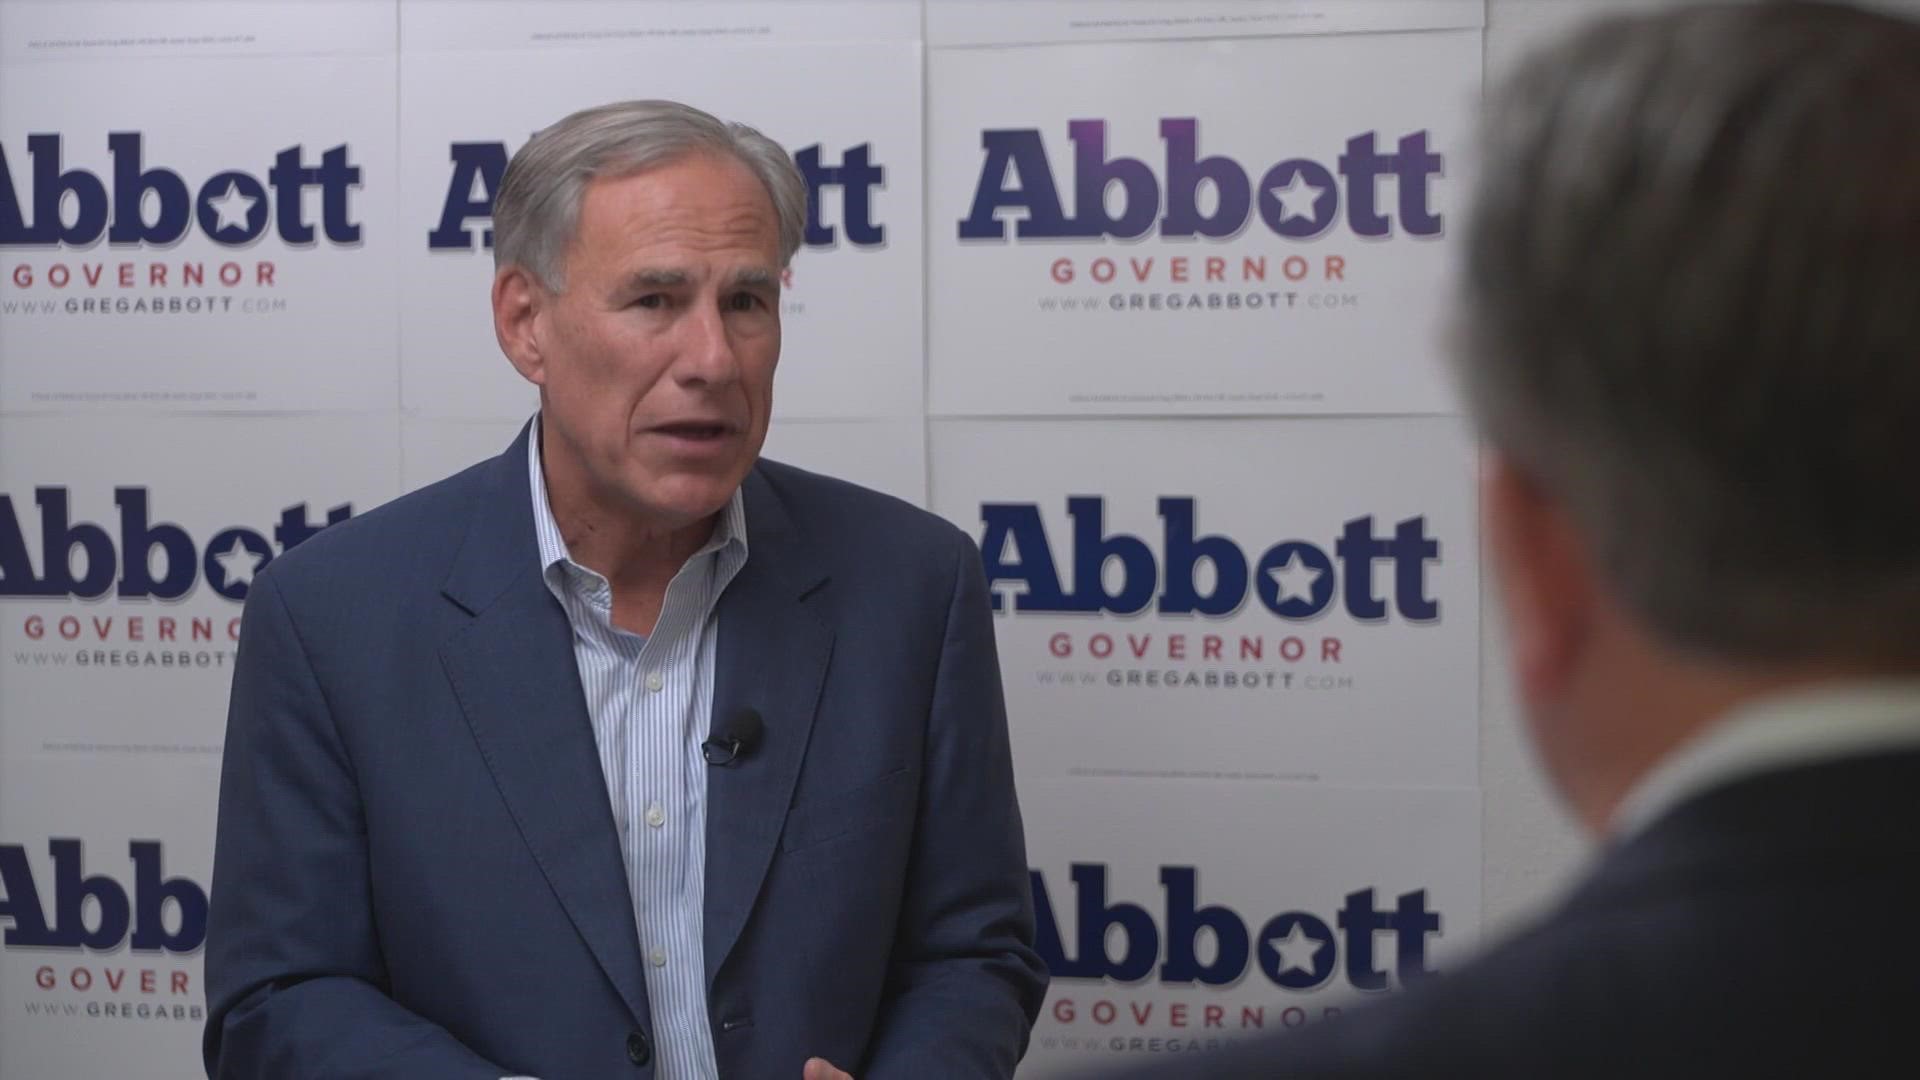 Gov. Abbott sits down with Jason Whitely to discuss issues ranging from abortion to Uvalde, property taxes to his Presidential ambition